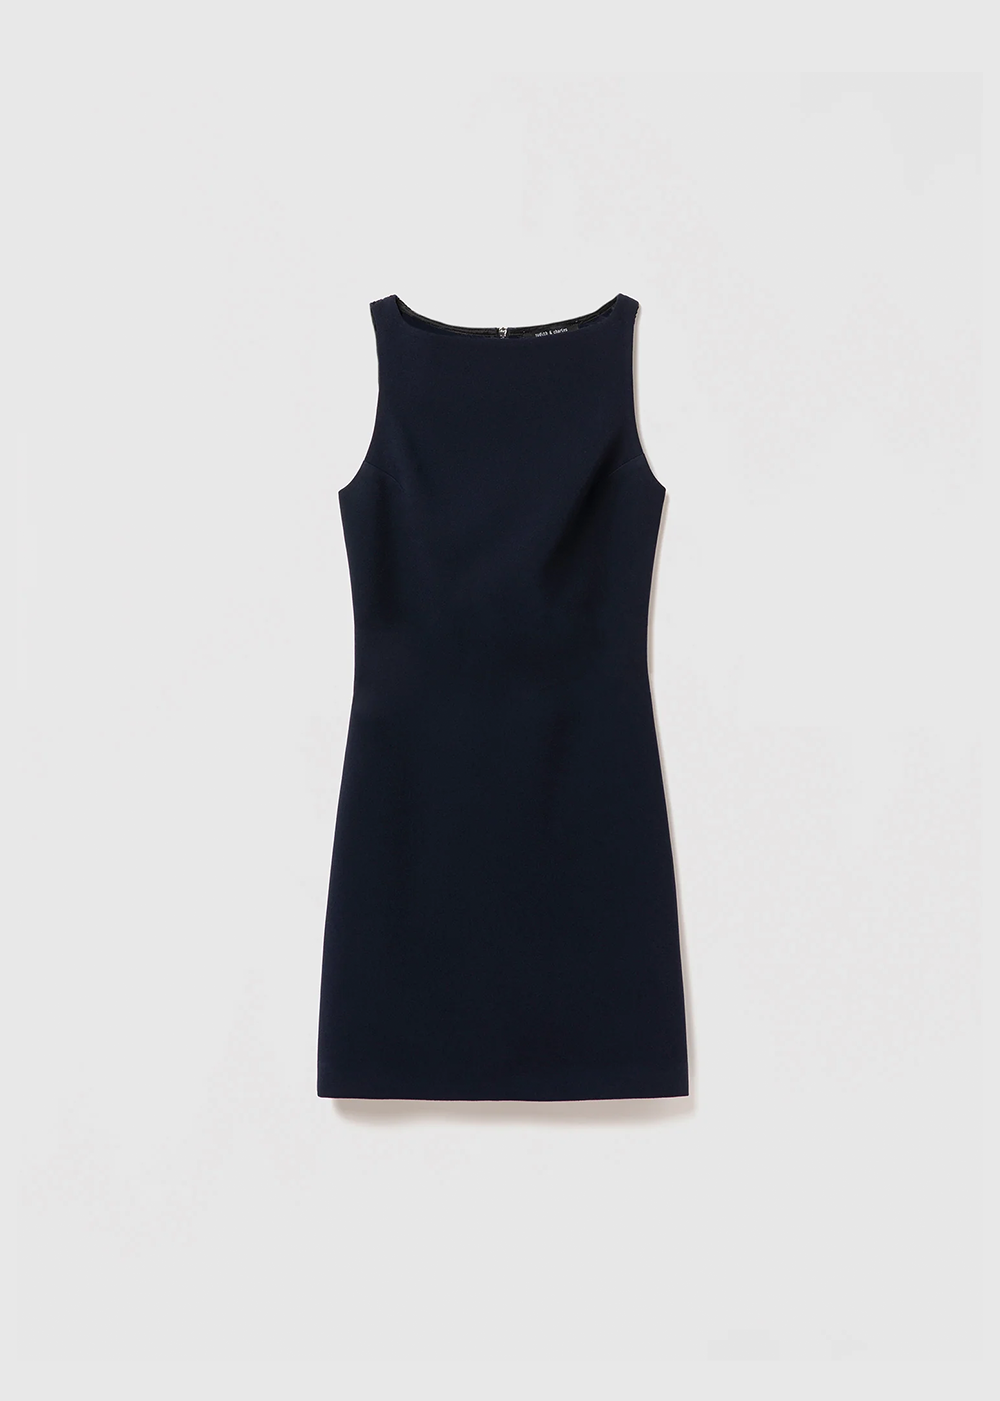 Camille Dress - Navy - Judith and Charles Canada - Danali